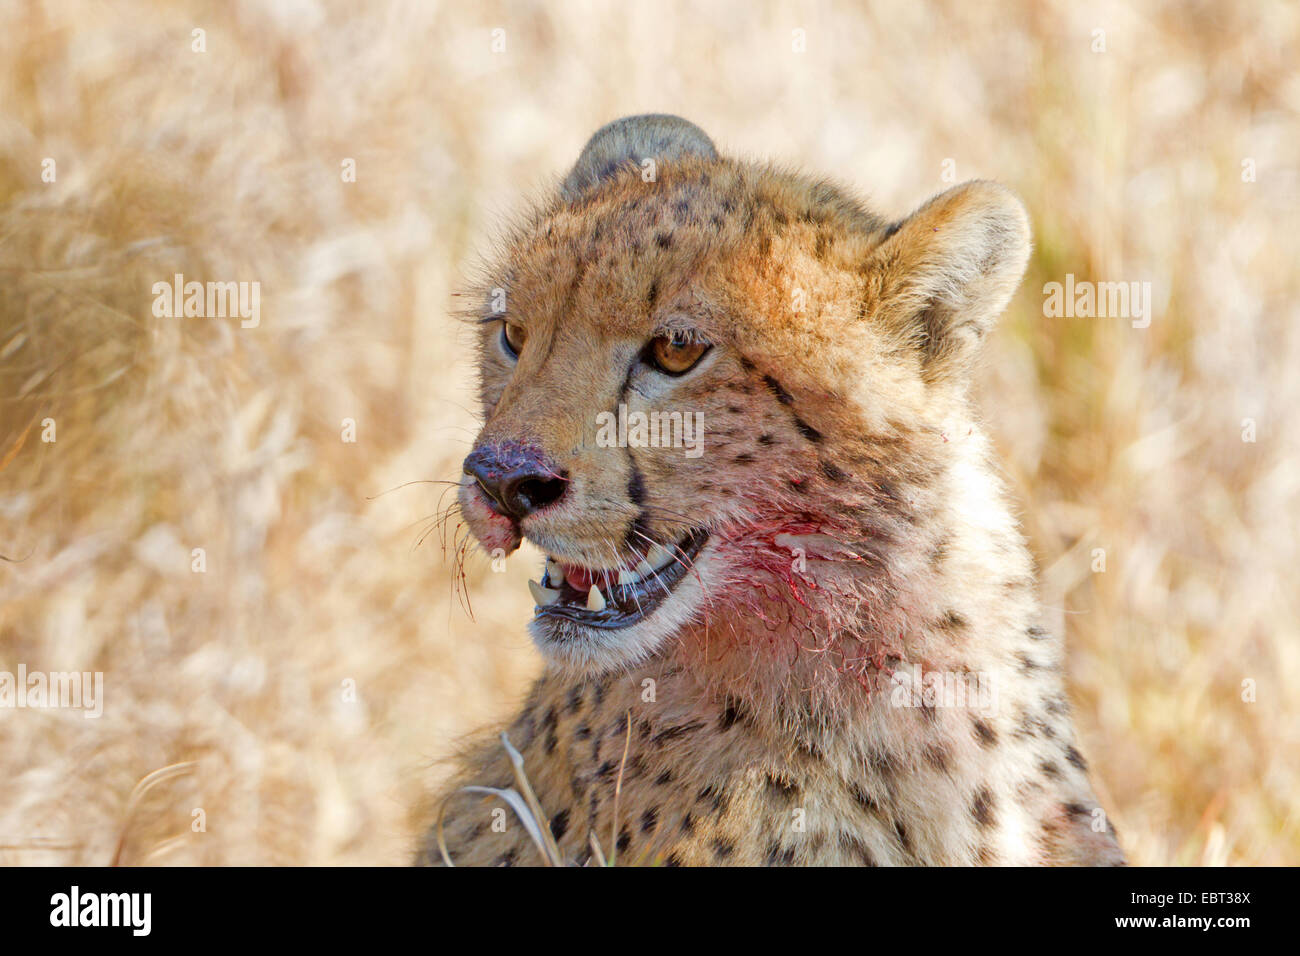 cheetah (Acinonyx jubatus), resting with the face covered with blood after feeding, South Africa, Krueger National Park Stock Photo